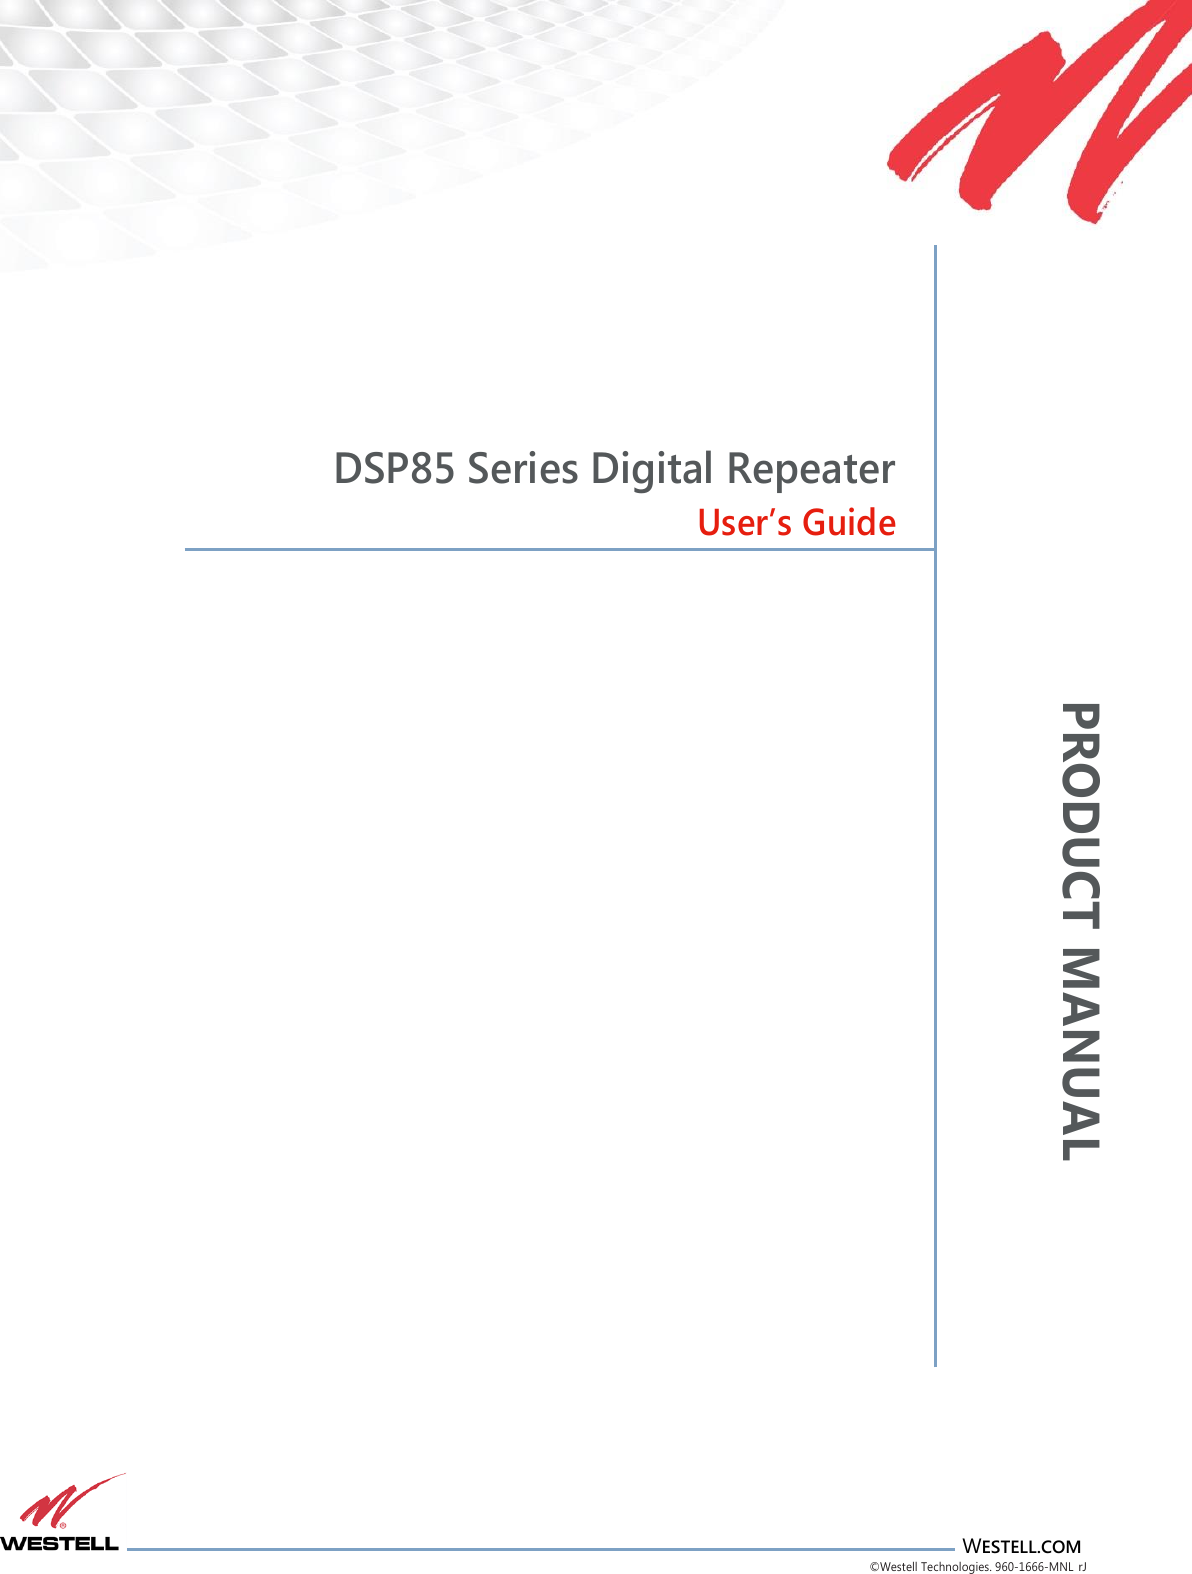 PRODUCT MANUAL                       WESTELL.COM ©Westell Technologies. 960-1666-MNL rJ           DSP85 Series Digital Repeater User’s Guide                                         